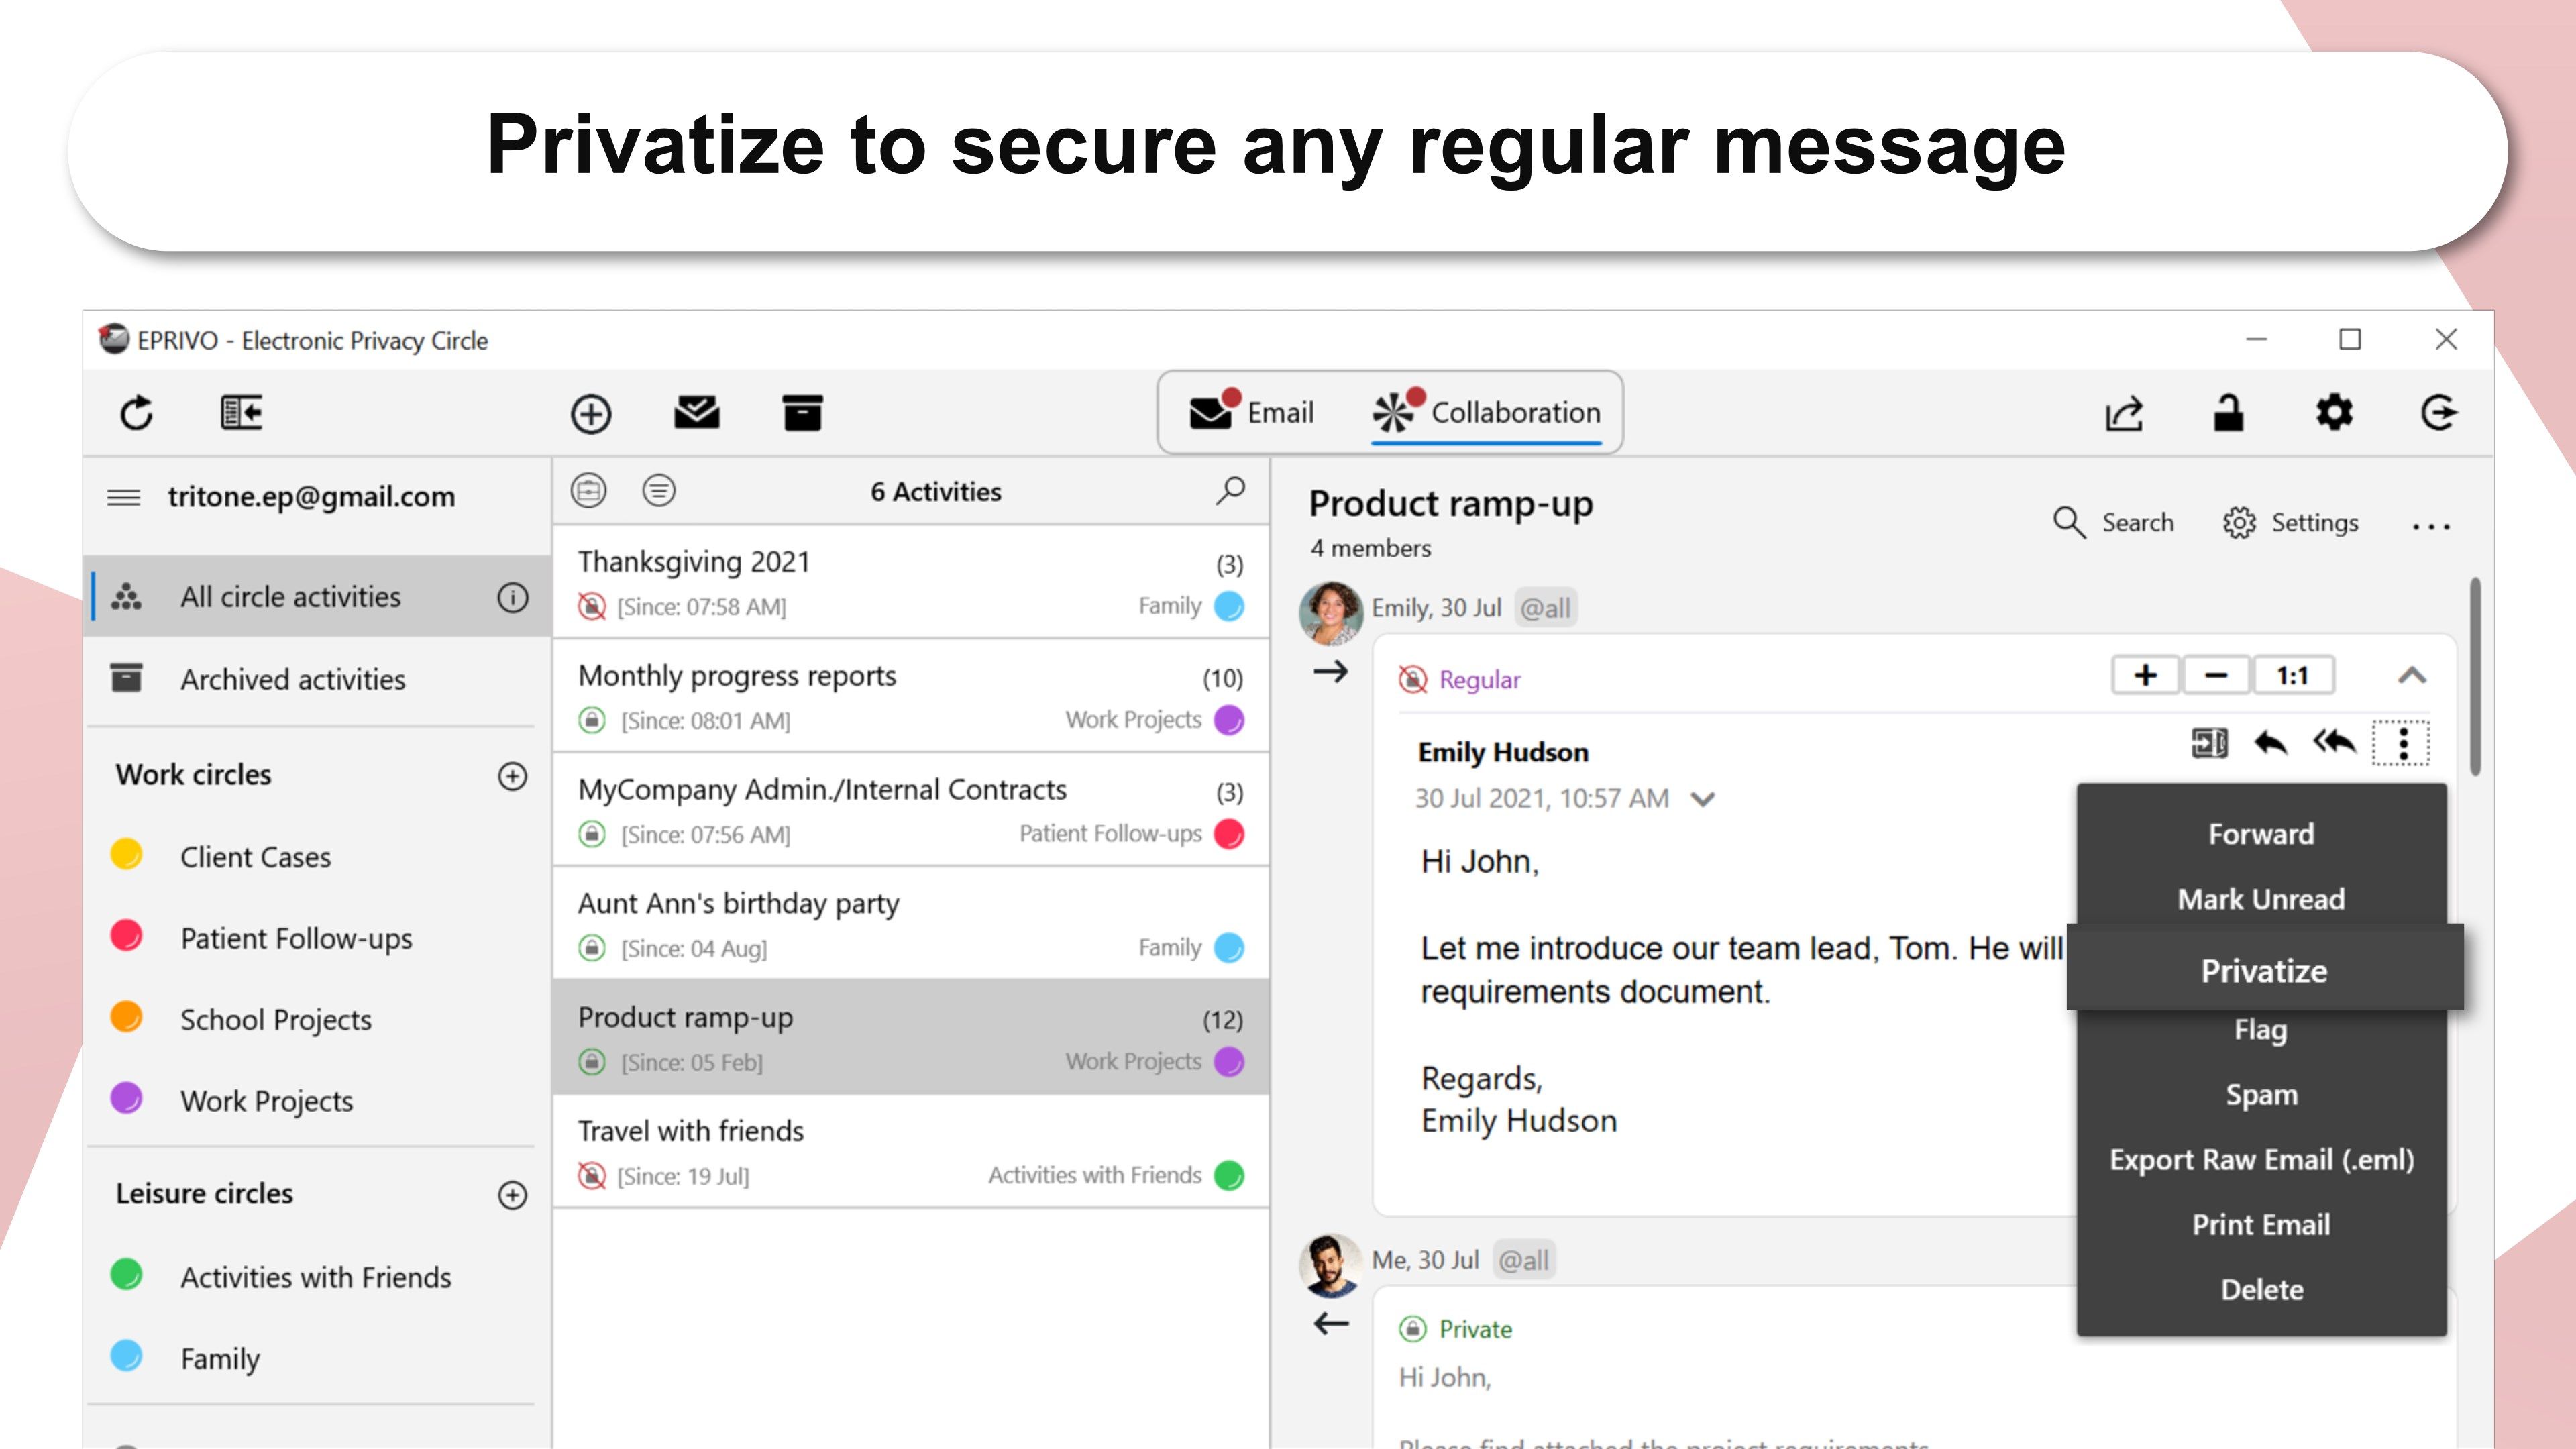 Privatize to secure any regular message